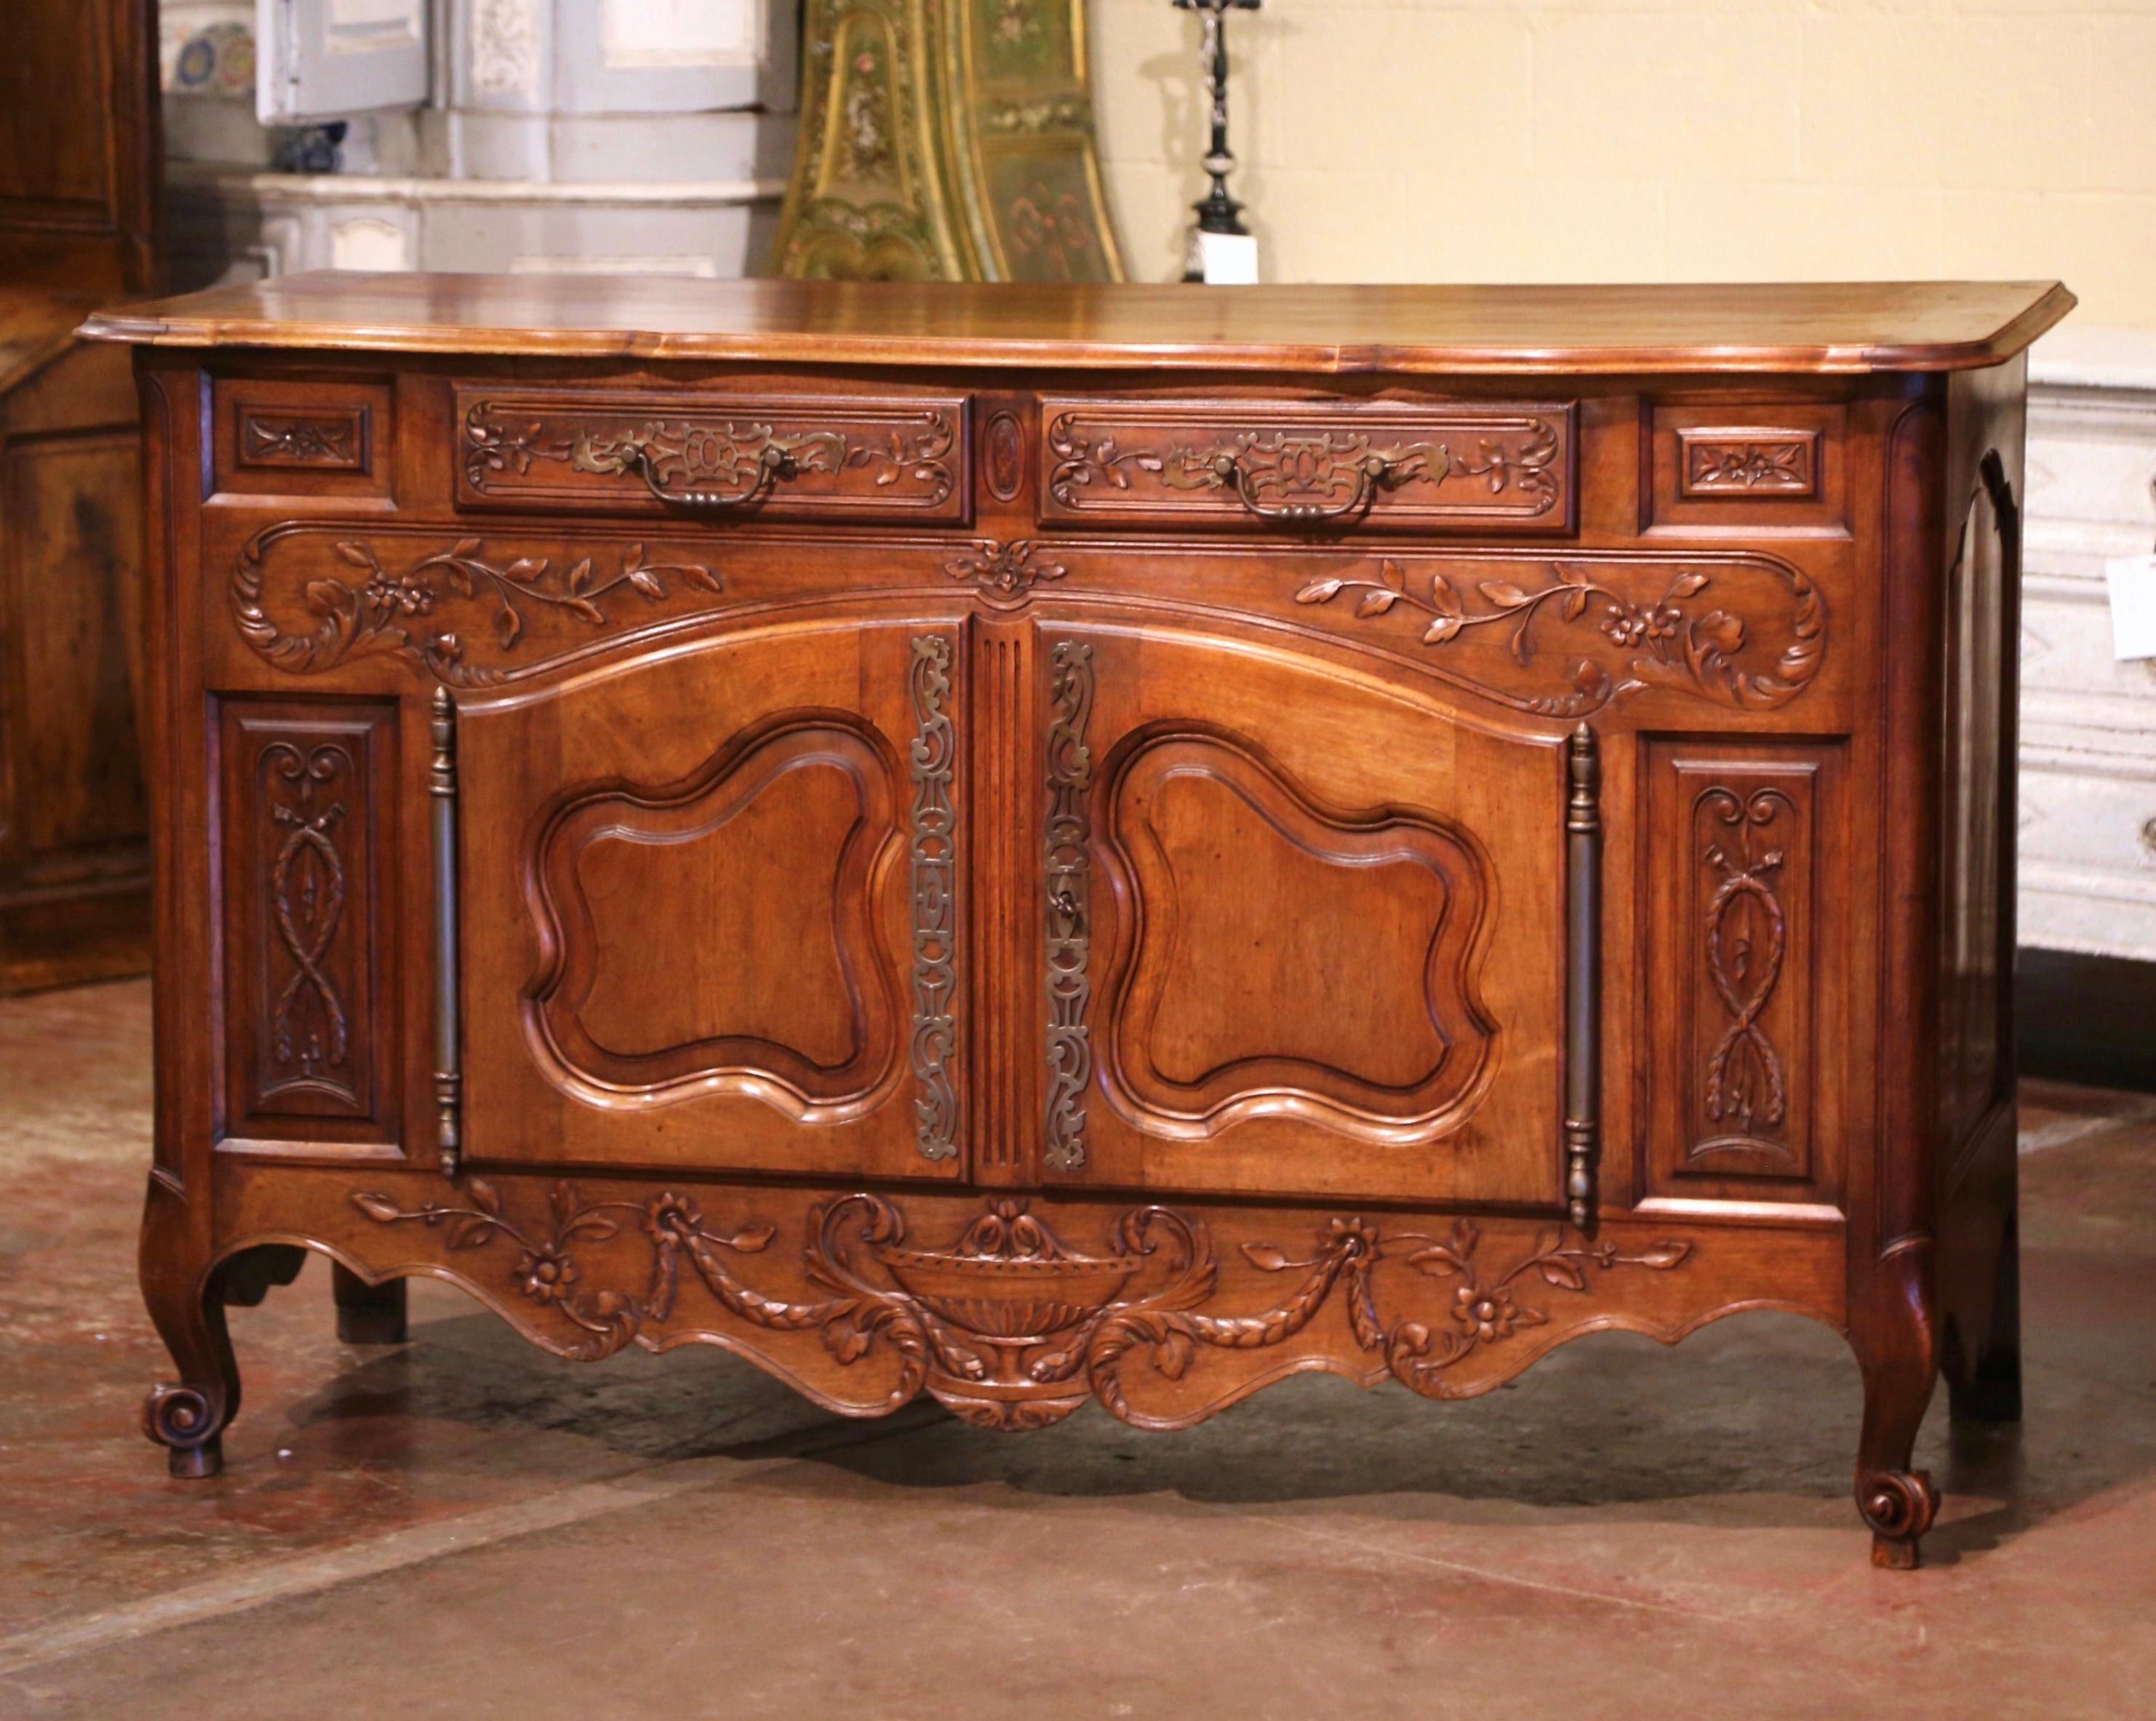 This elegant, antique fruit wood sideboard was carved in Southern France, circa 1880. The Classic sideboard exemplifies the Louis XV style with a heavy presence, dramatic lines and intricate floral and foliage carvings throughout. The cabinet stands